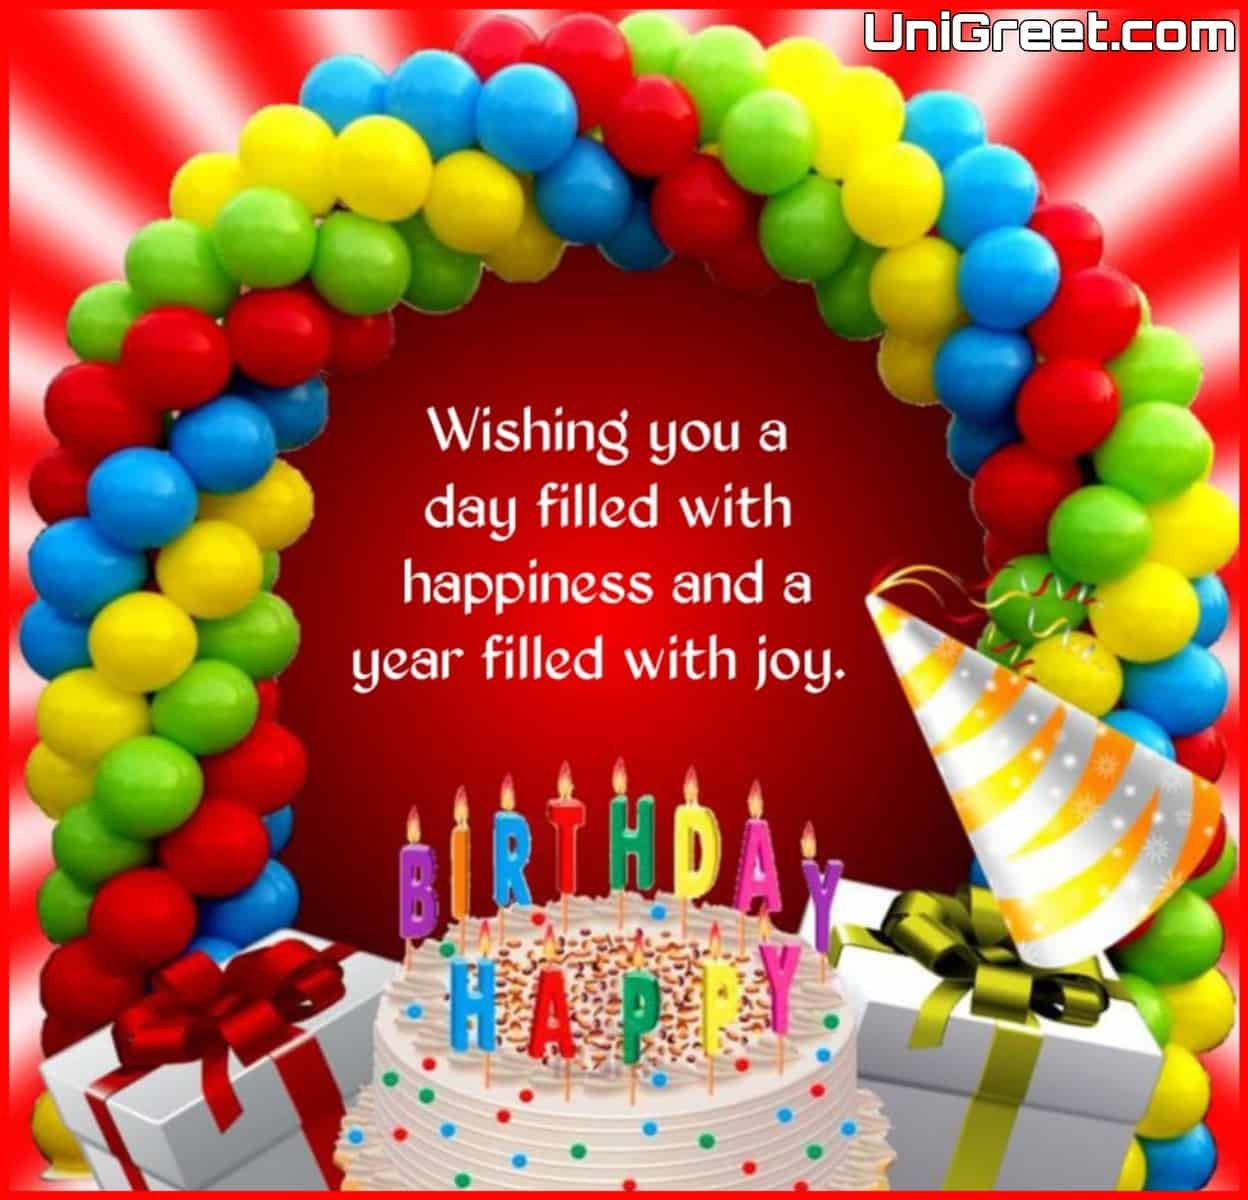 Incredible Compilation of Full 4K Birthday Wishes Images – 999+ Exquisite Birthday Images